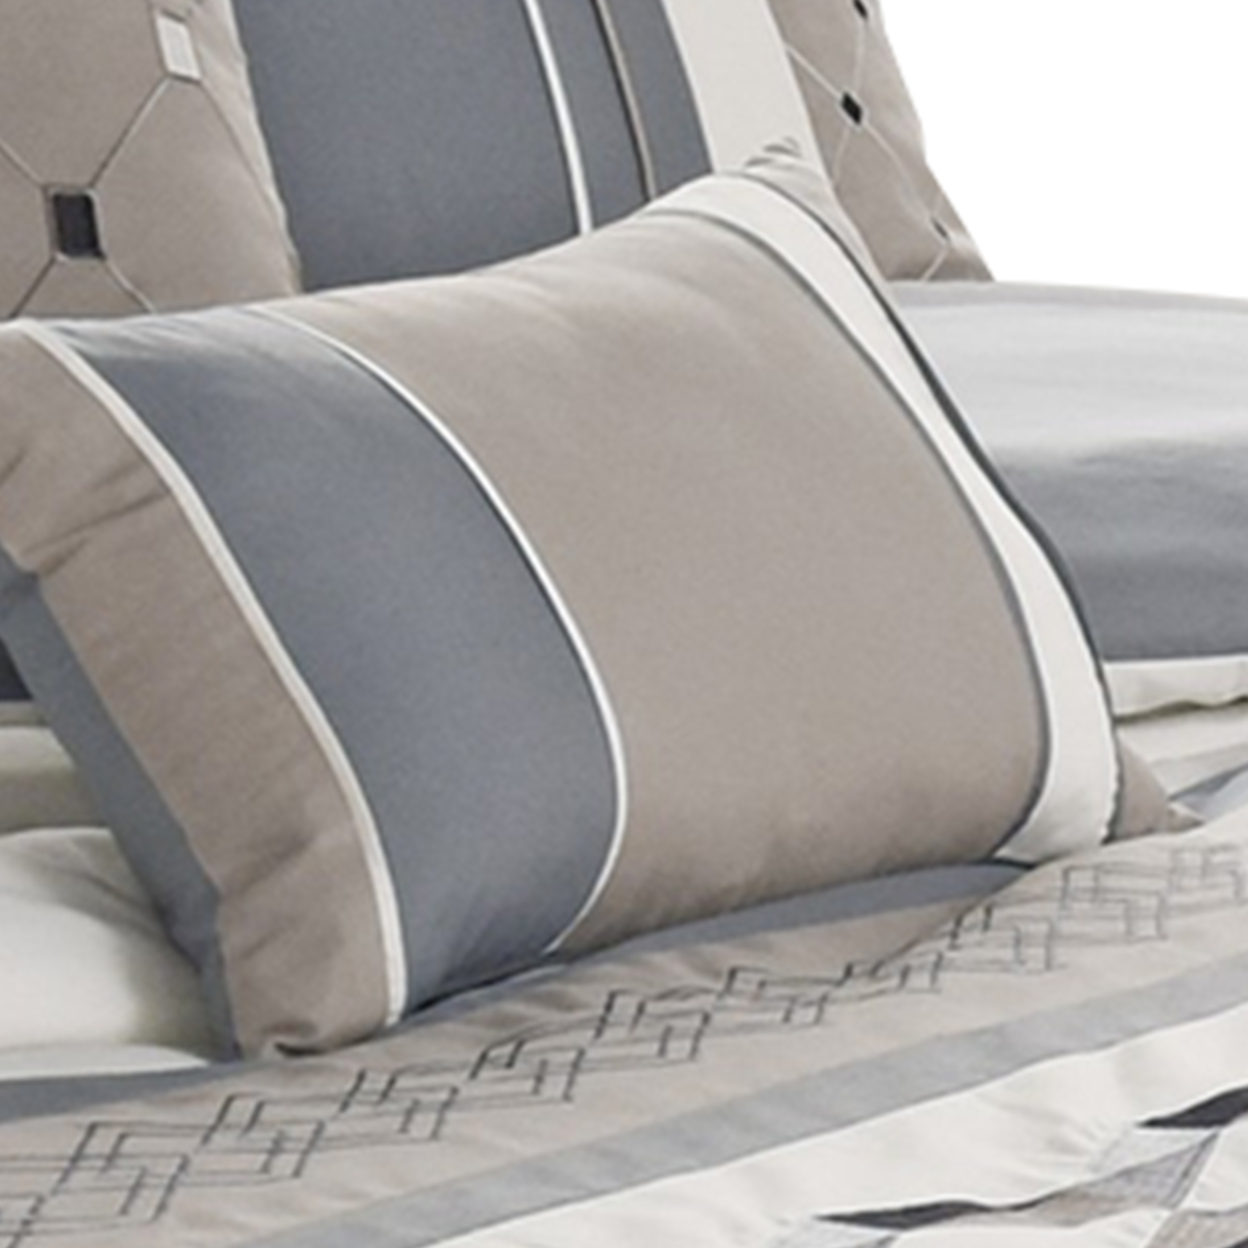 7 Piece Queen Polyester Comforter Set With Geometric Design, Blue And Gray- Saltoro Sherpi